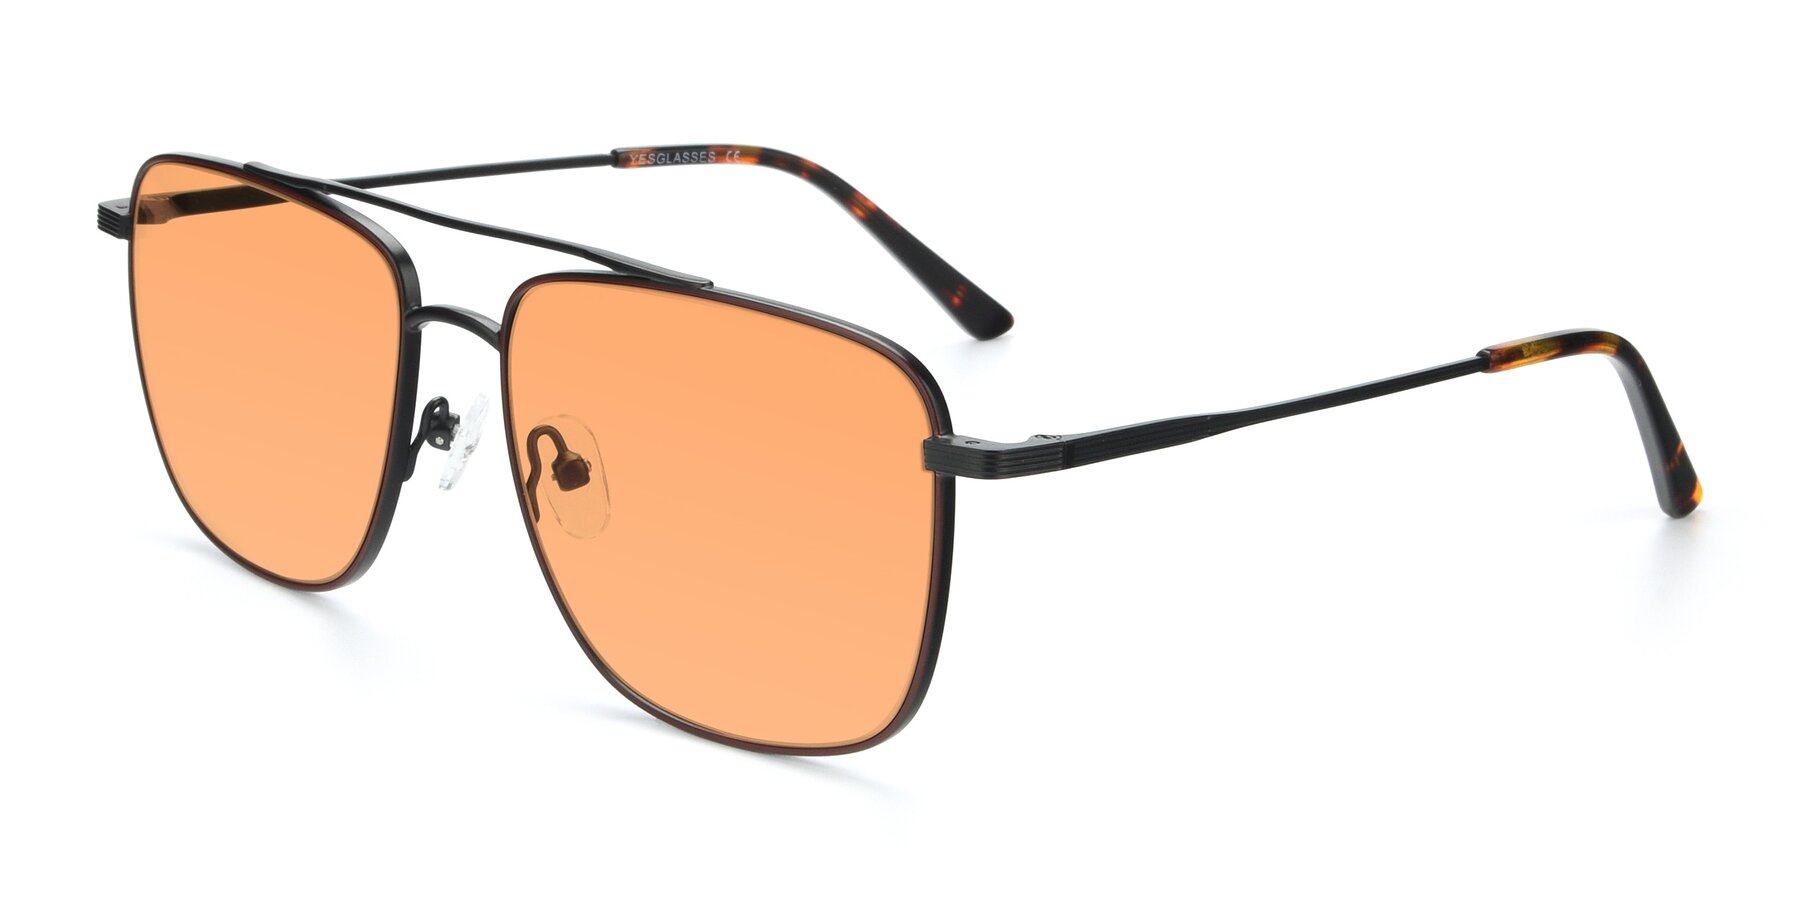 Angle of 9519 in Brown-Black with Medium Orange Tinted Lenses